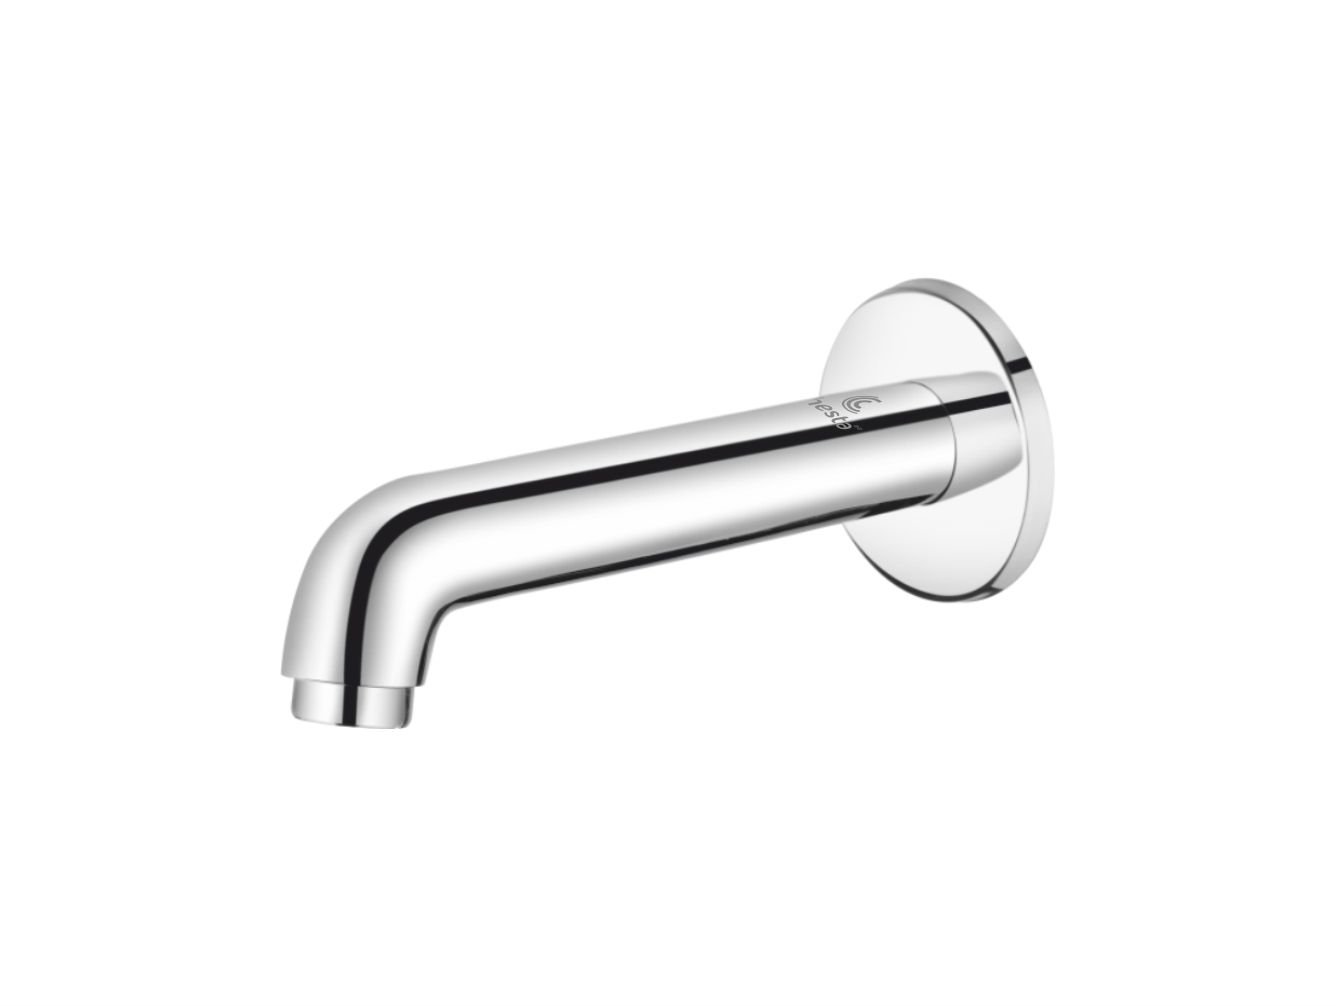 ST - 1021 - Diverter Spout with Wall Flange at Chesta Bath Fittings